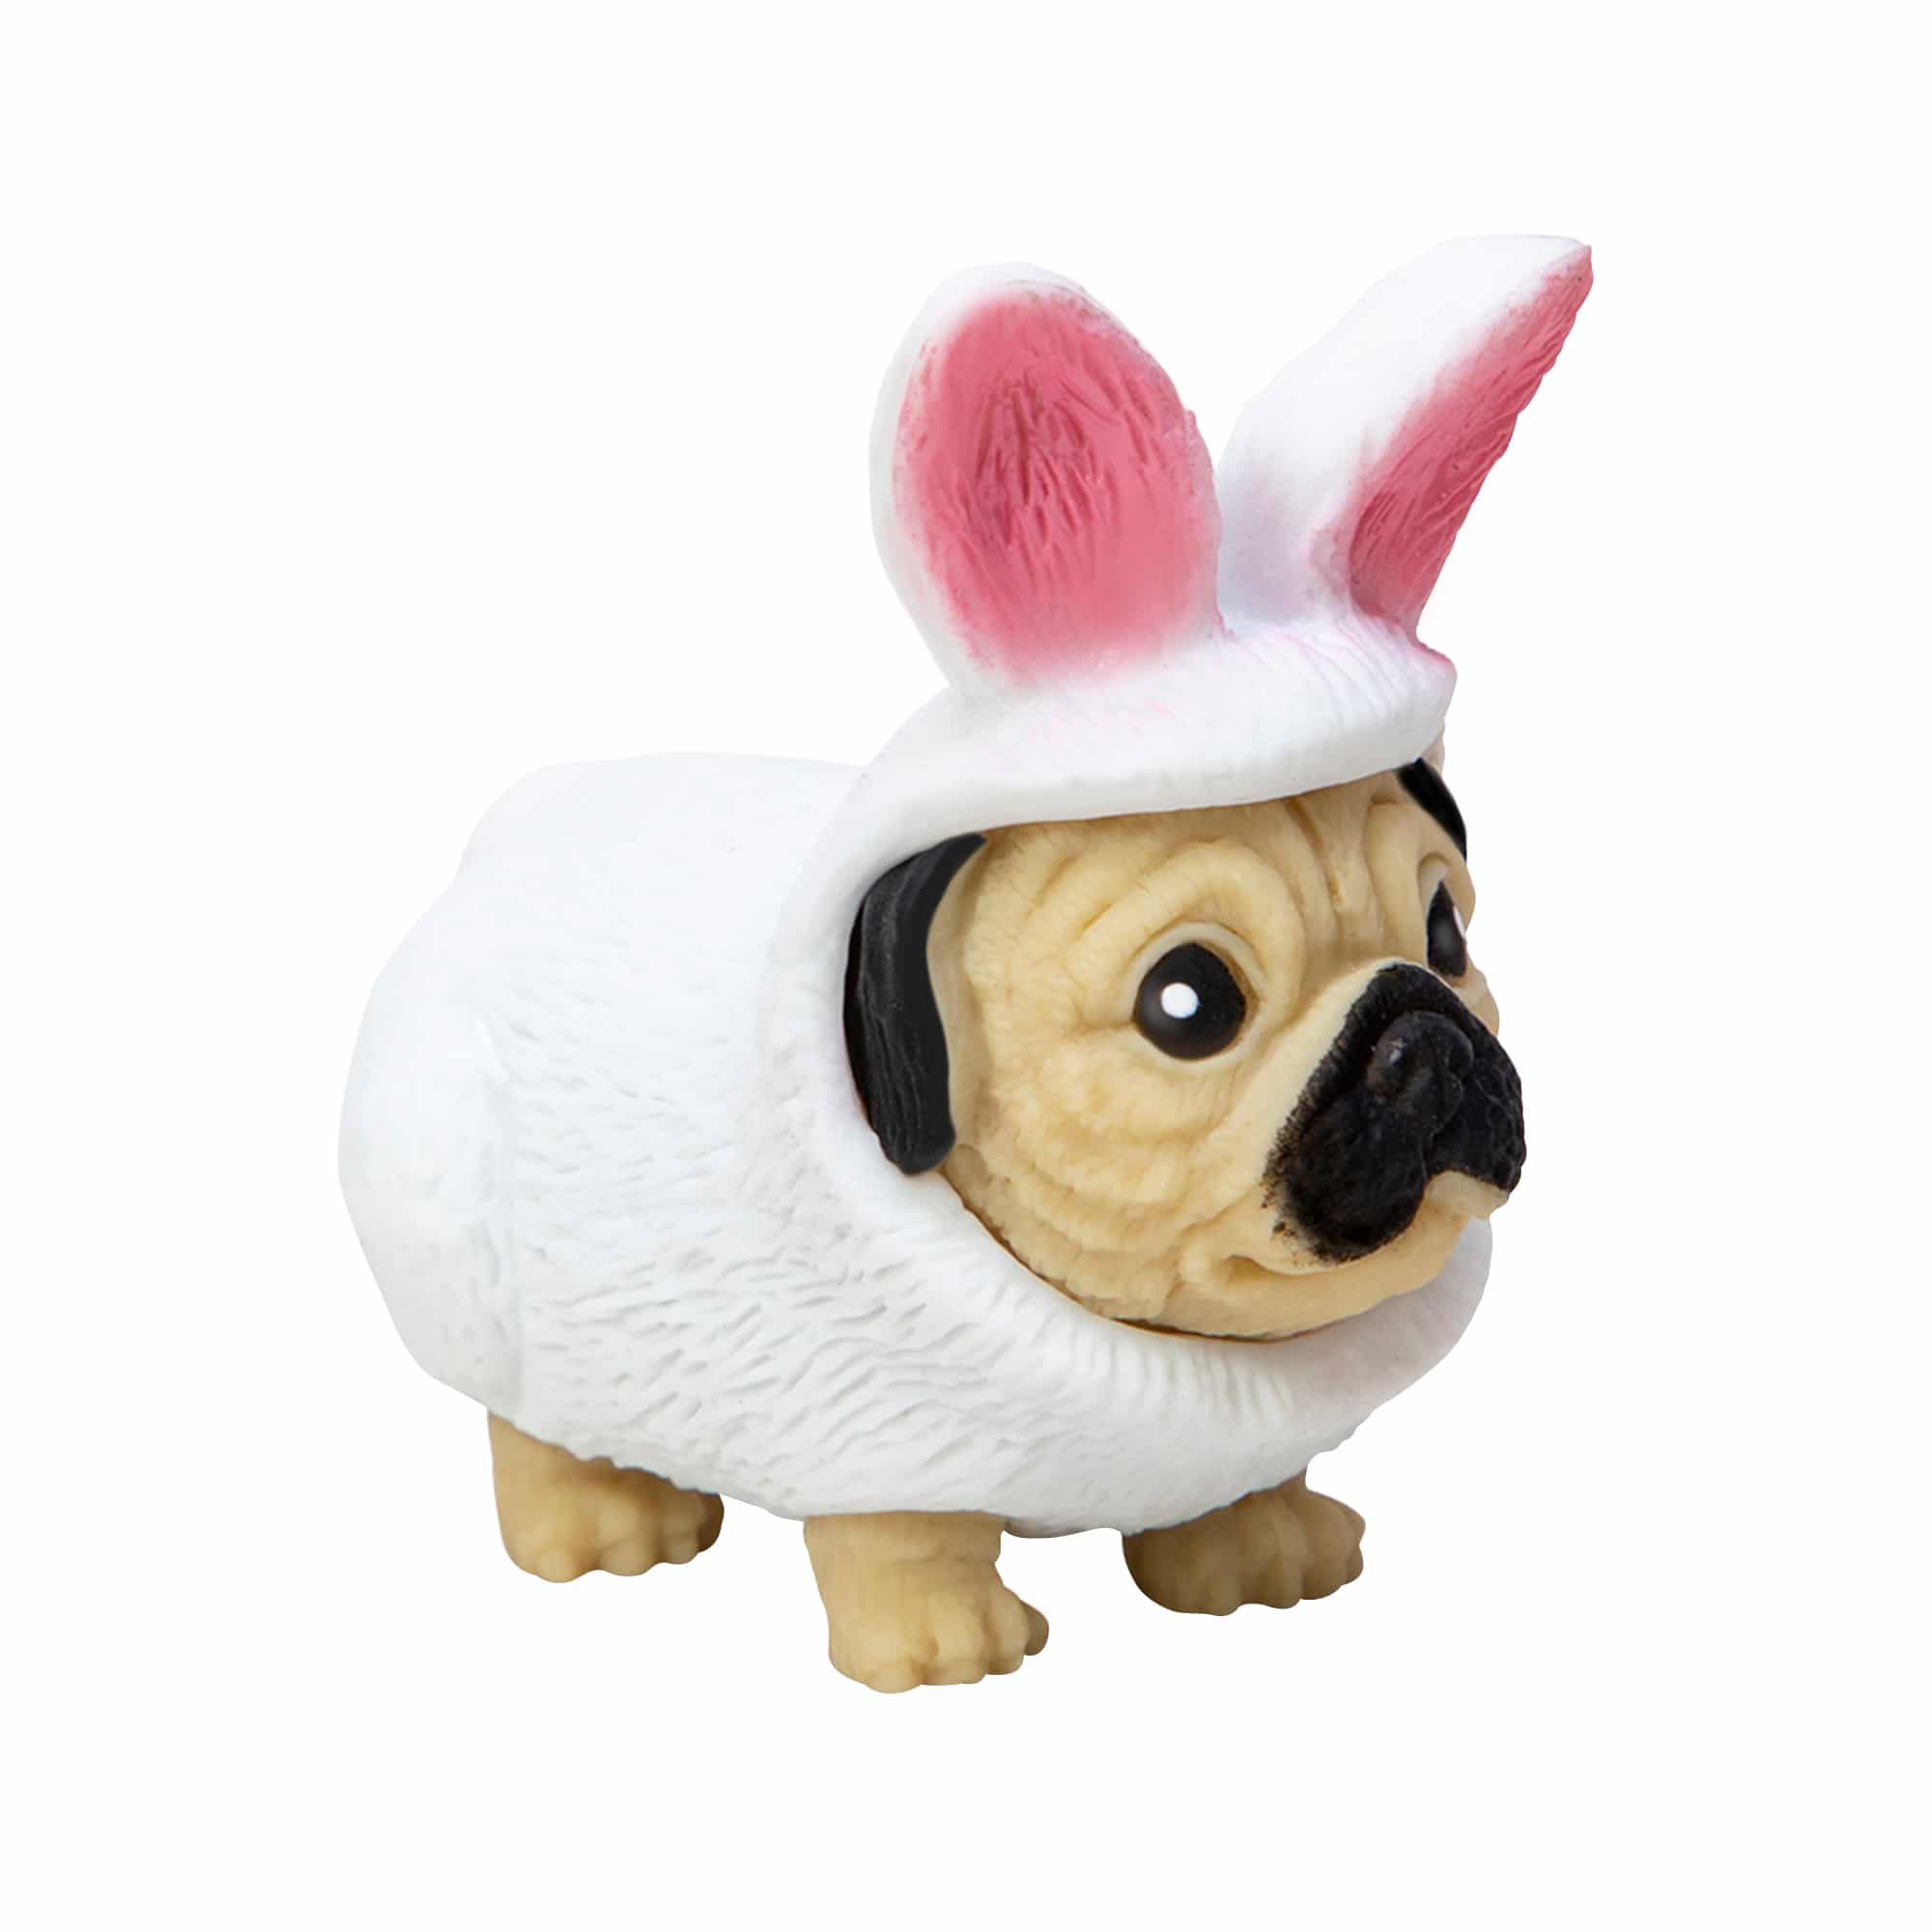 Party Puppies in Costumes (Single) - Assorted Styles    